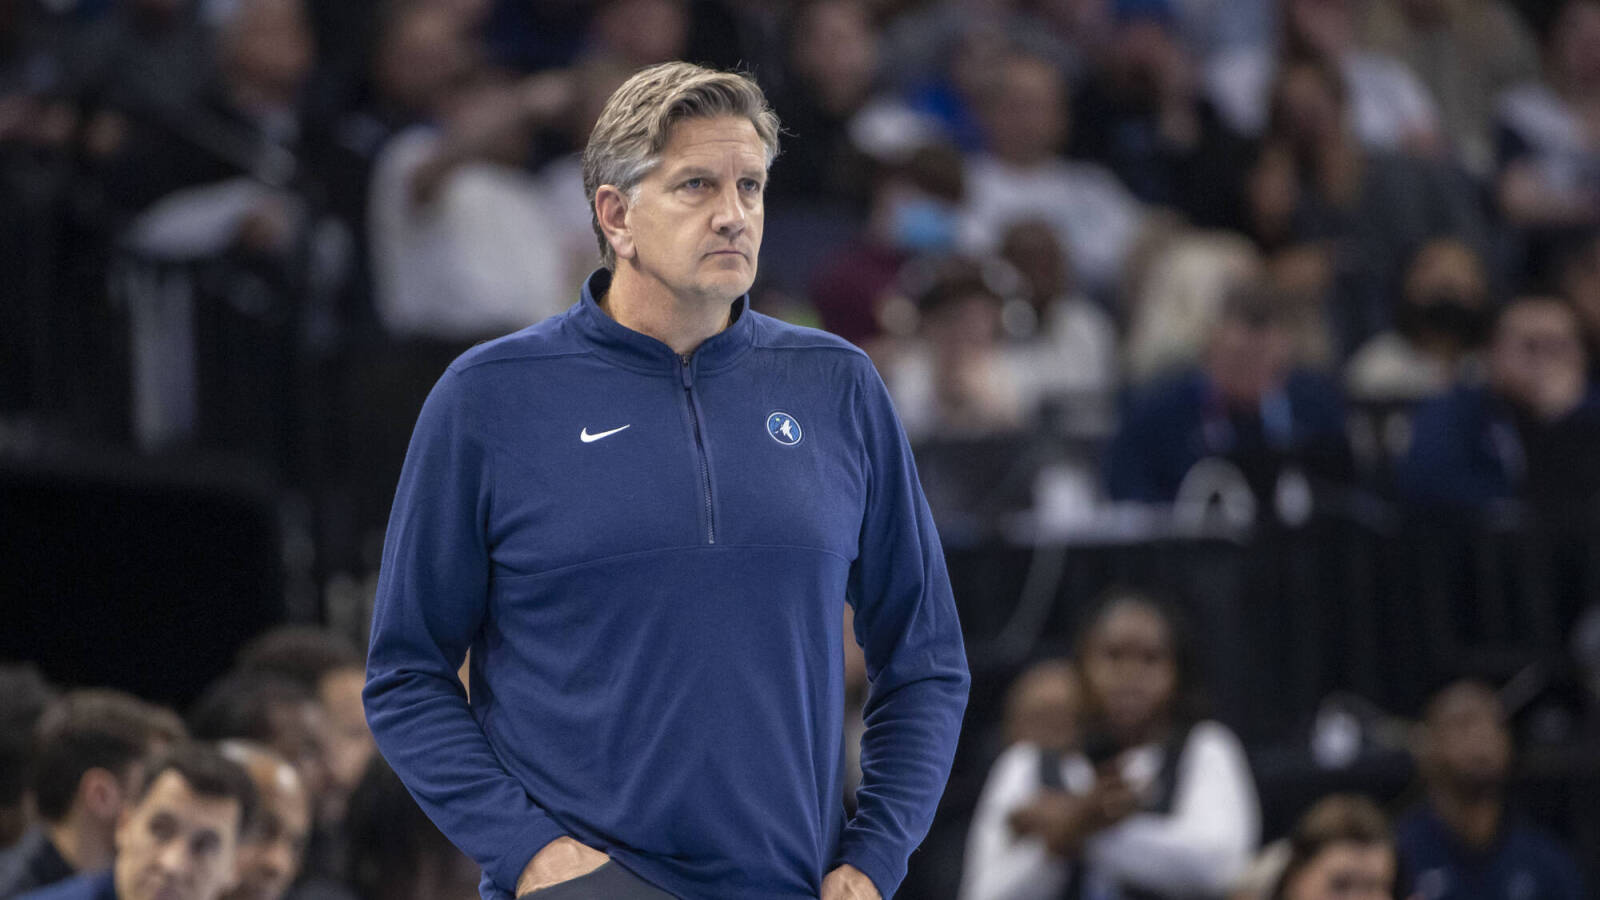 Timberwolves coach Chris Finch unloads on team after losing despite Karl-Anthony Towns’ 62 points